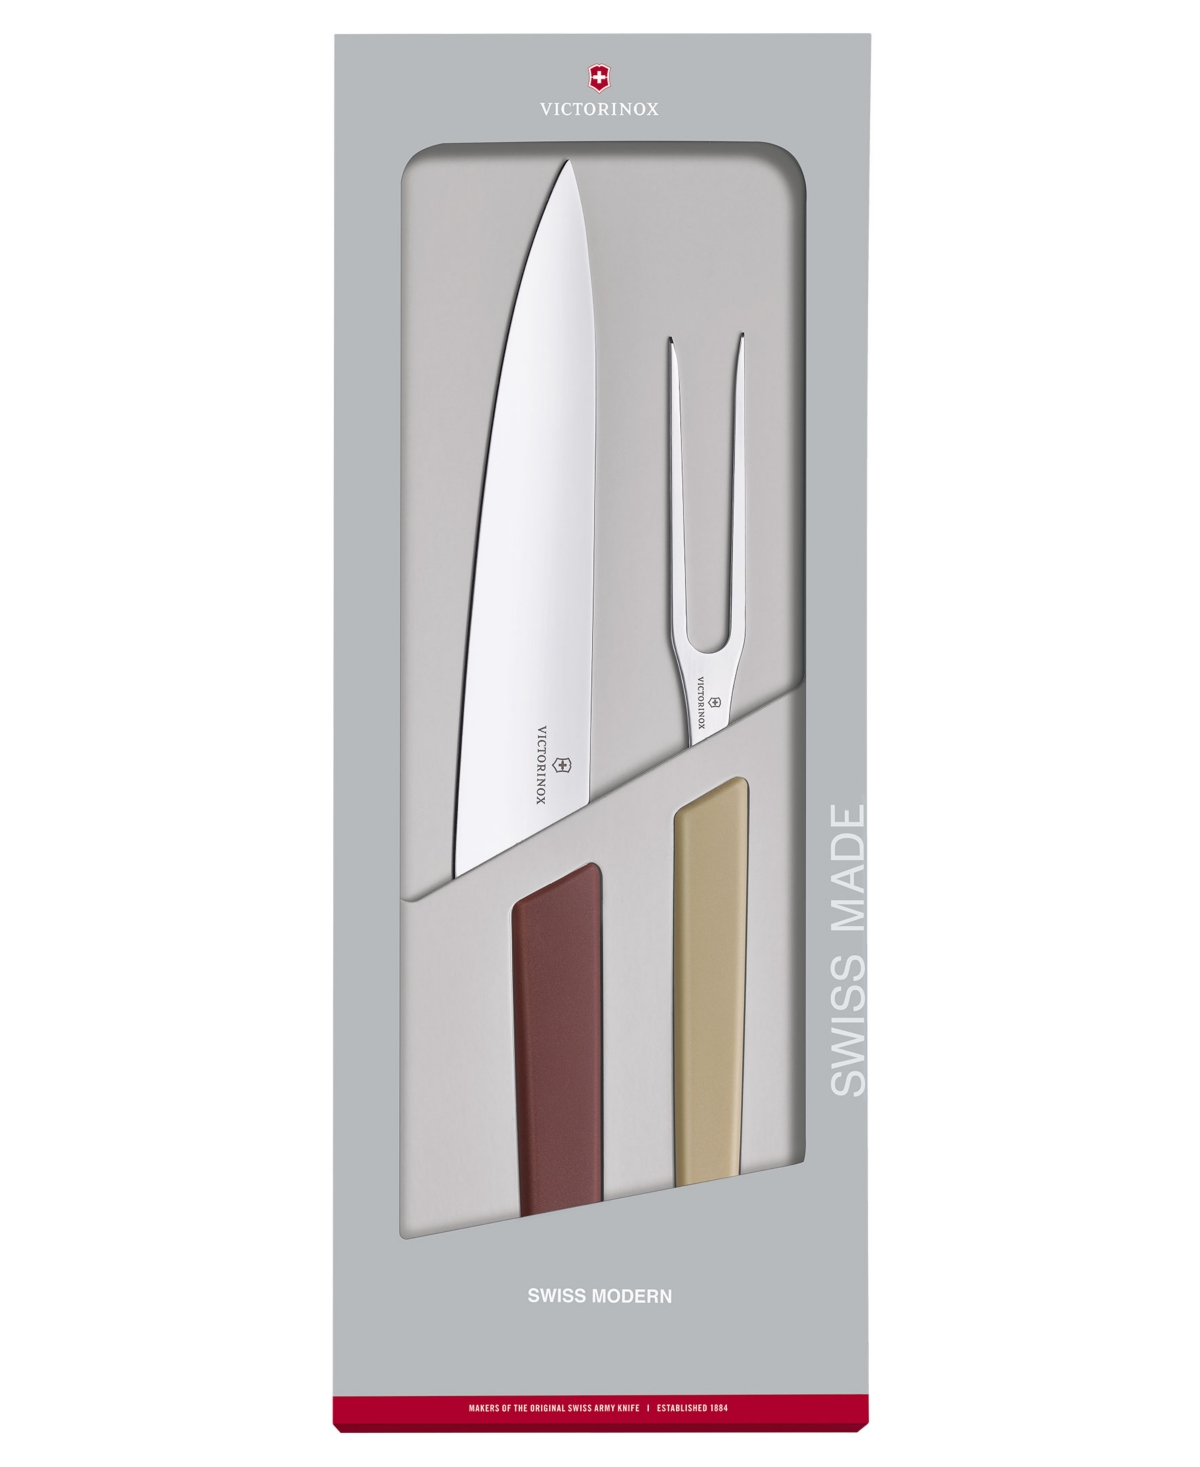 Shop Victorinox Stainless Steel 2 Piece Carving Set In Assorted